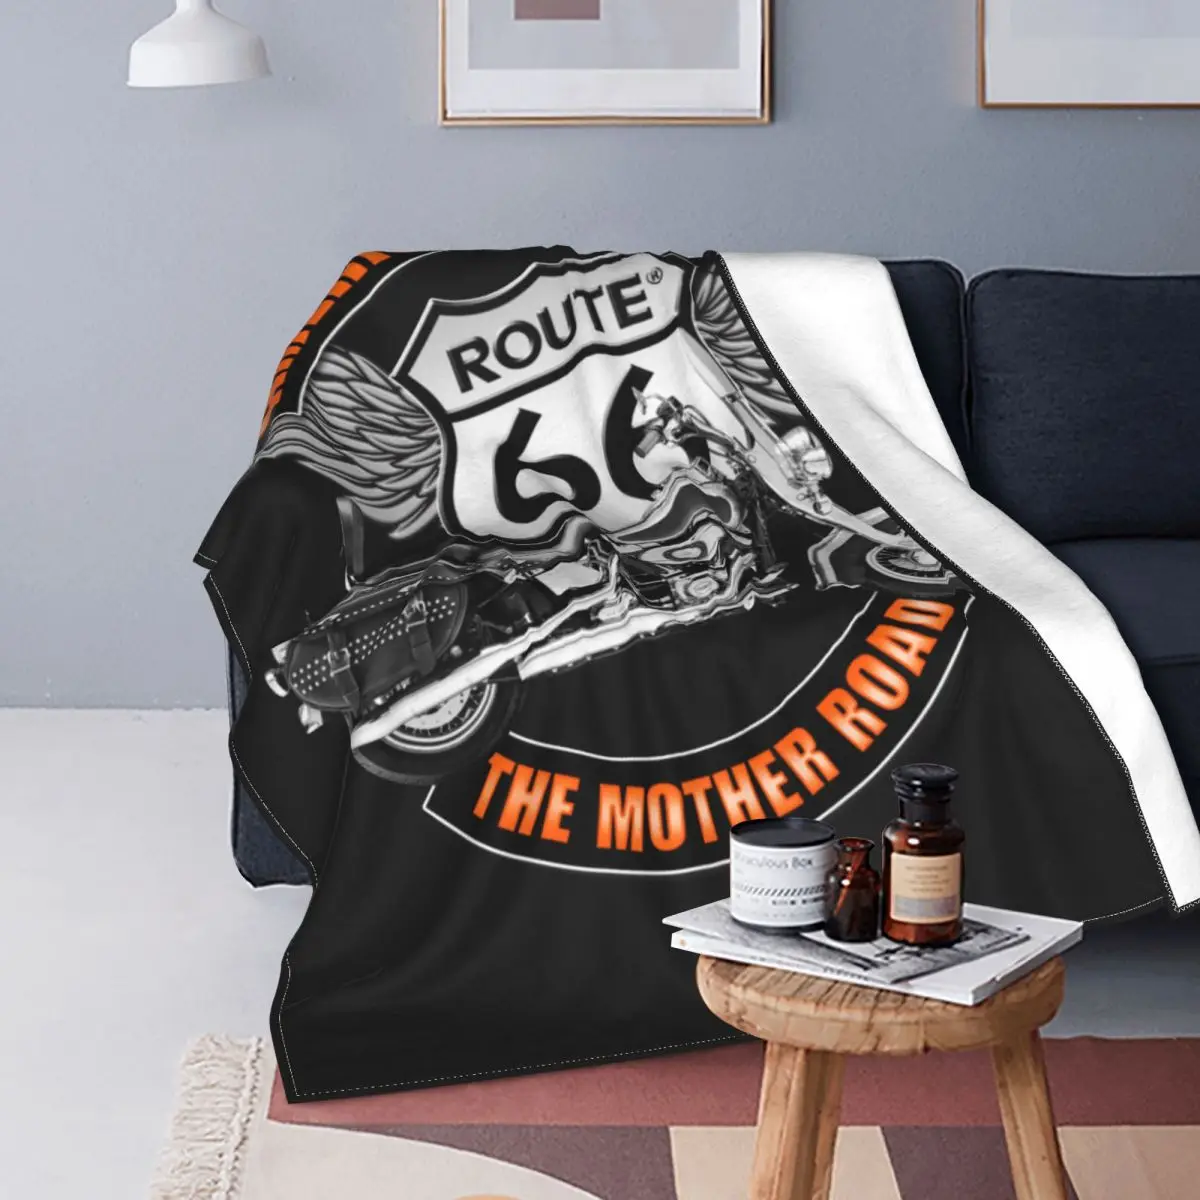 

Americas Highway Blankets Fleece Winter Route 66 Mother Road Classic Retro Oldschool Soft Throw Blankets for Bed Travel Quilt